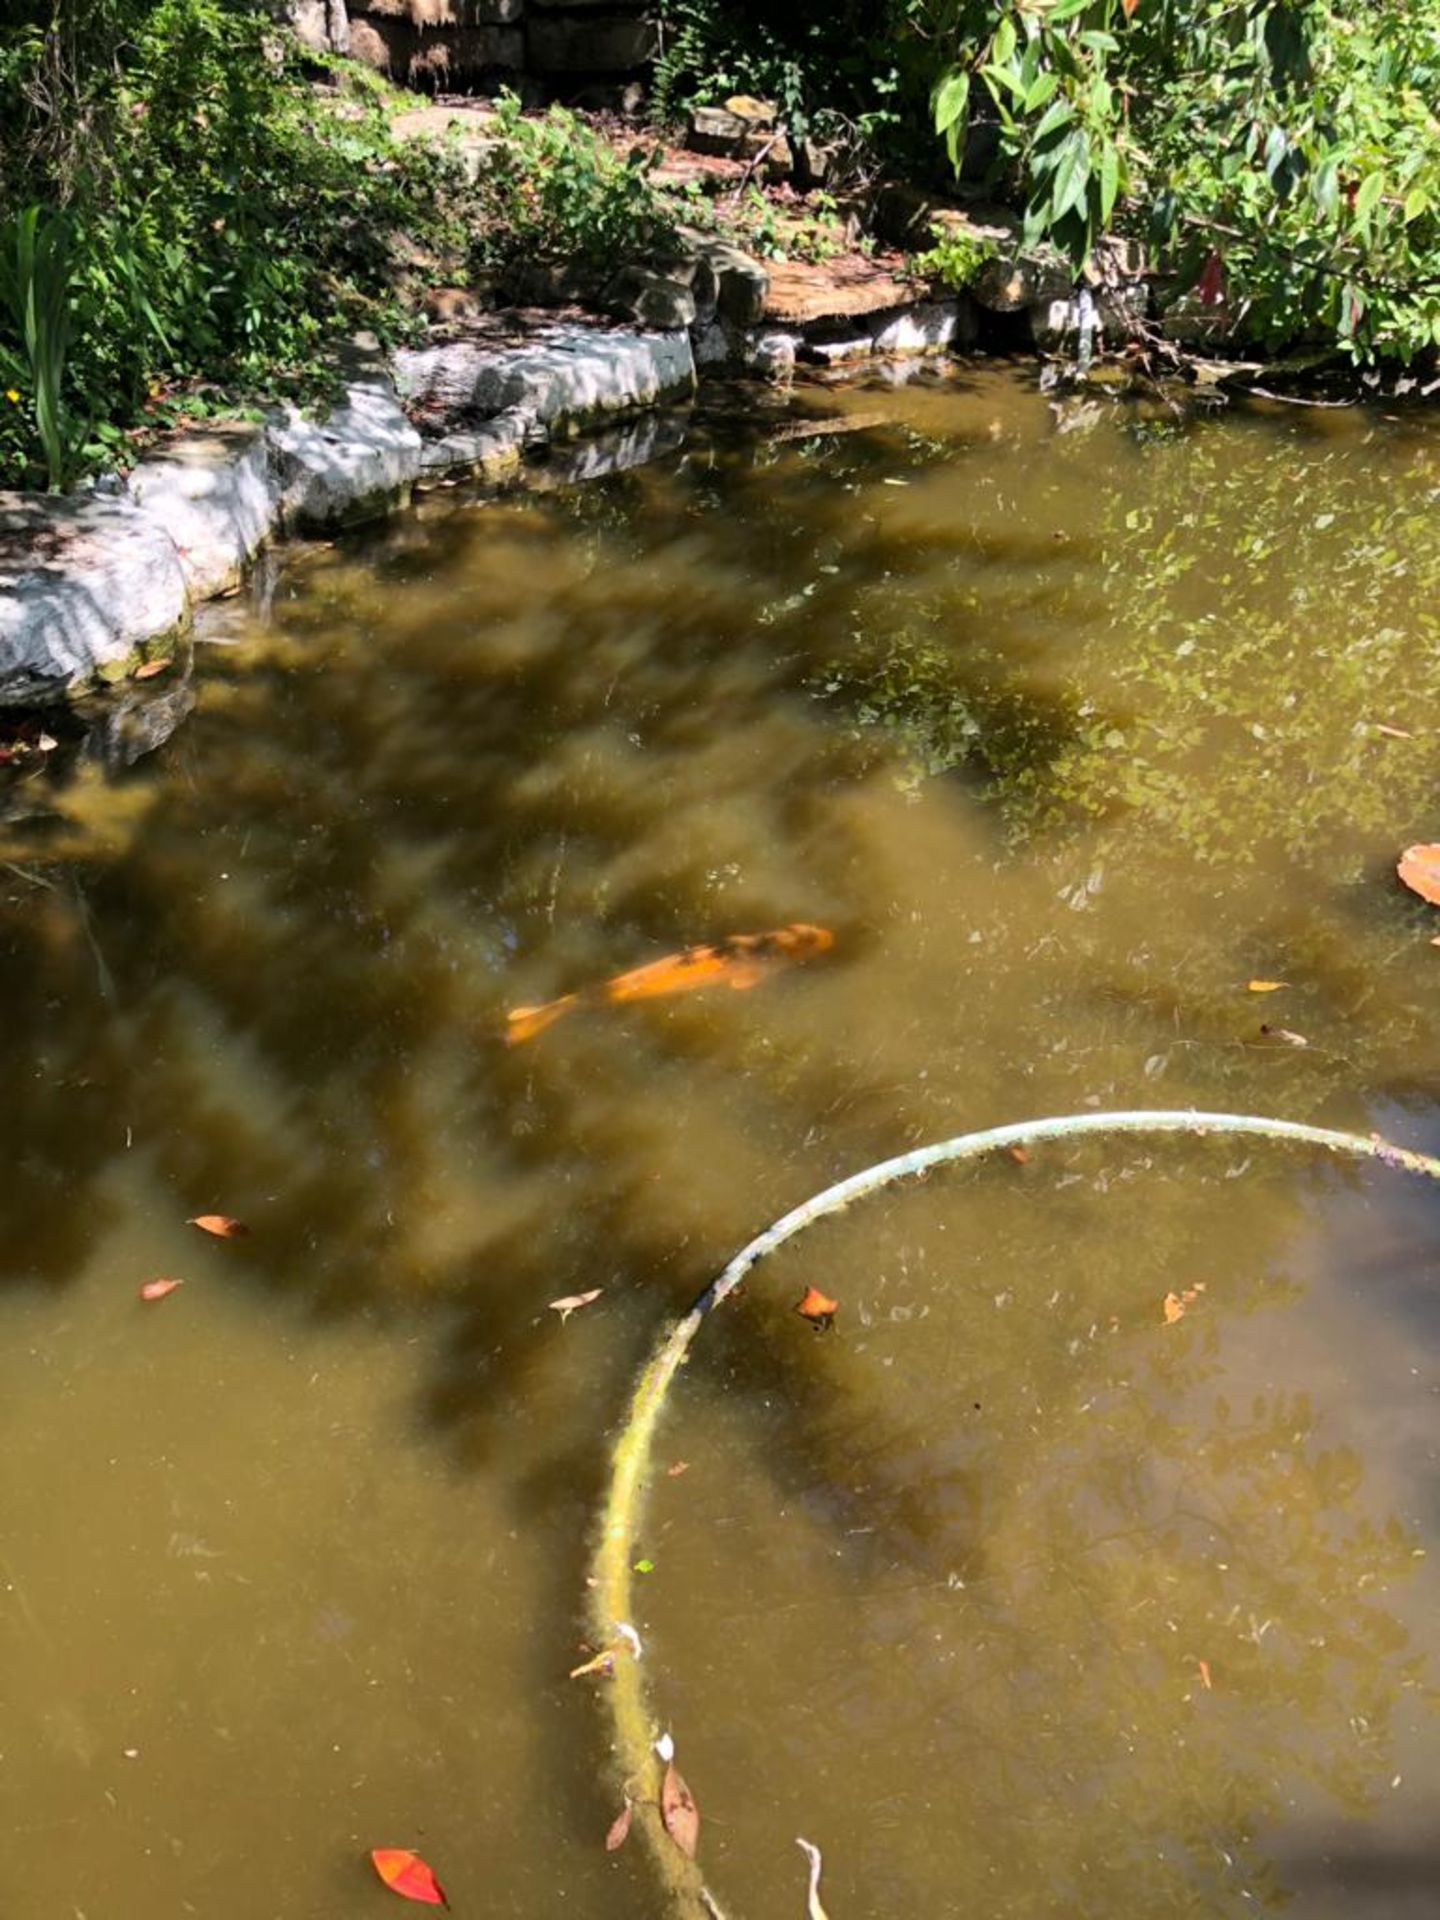 All Koi Carp of Varying Length and Colours to ornamental pond, Approx. 6 Fish, 12 Inch to 24 Inch in - Image 34 of 36